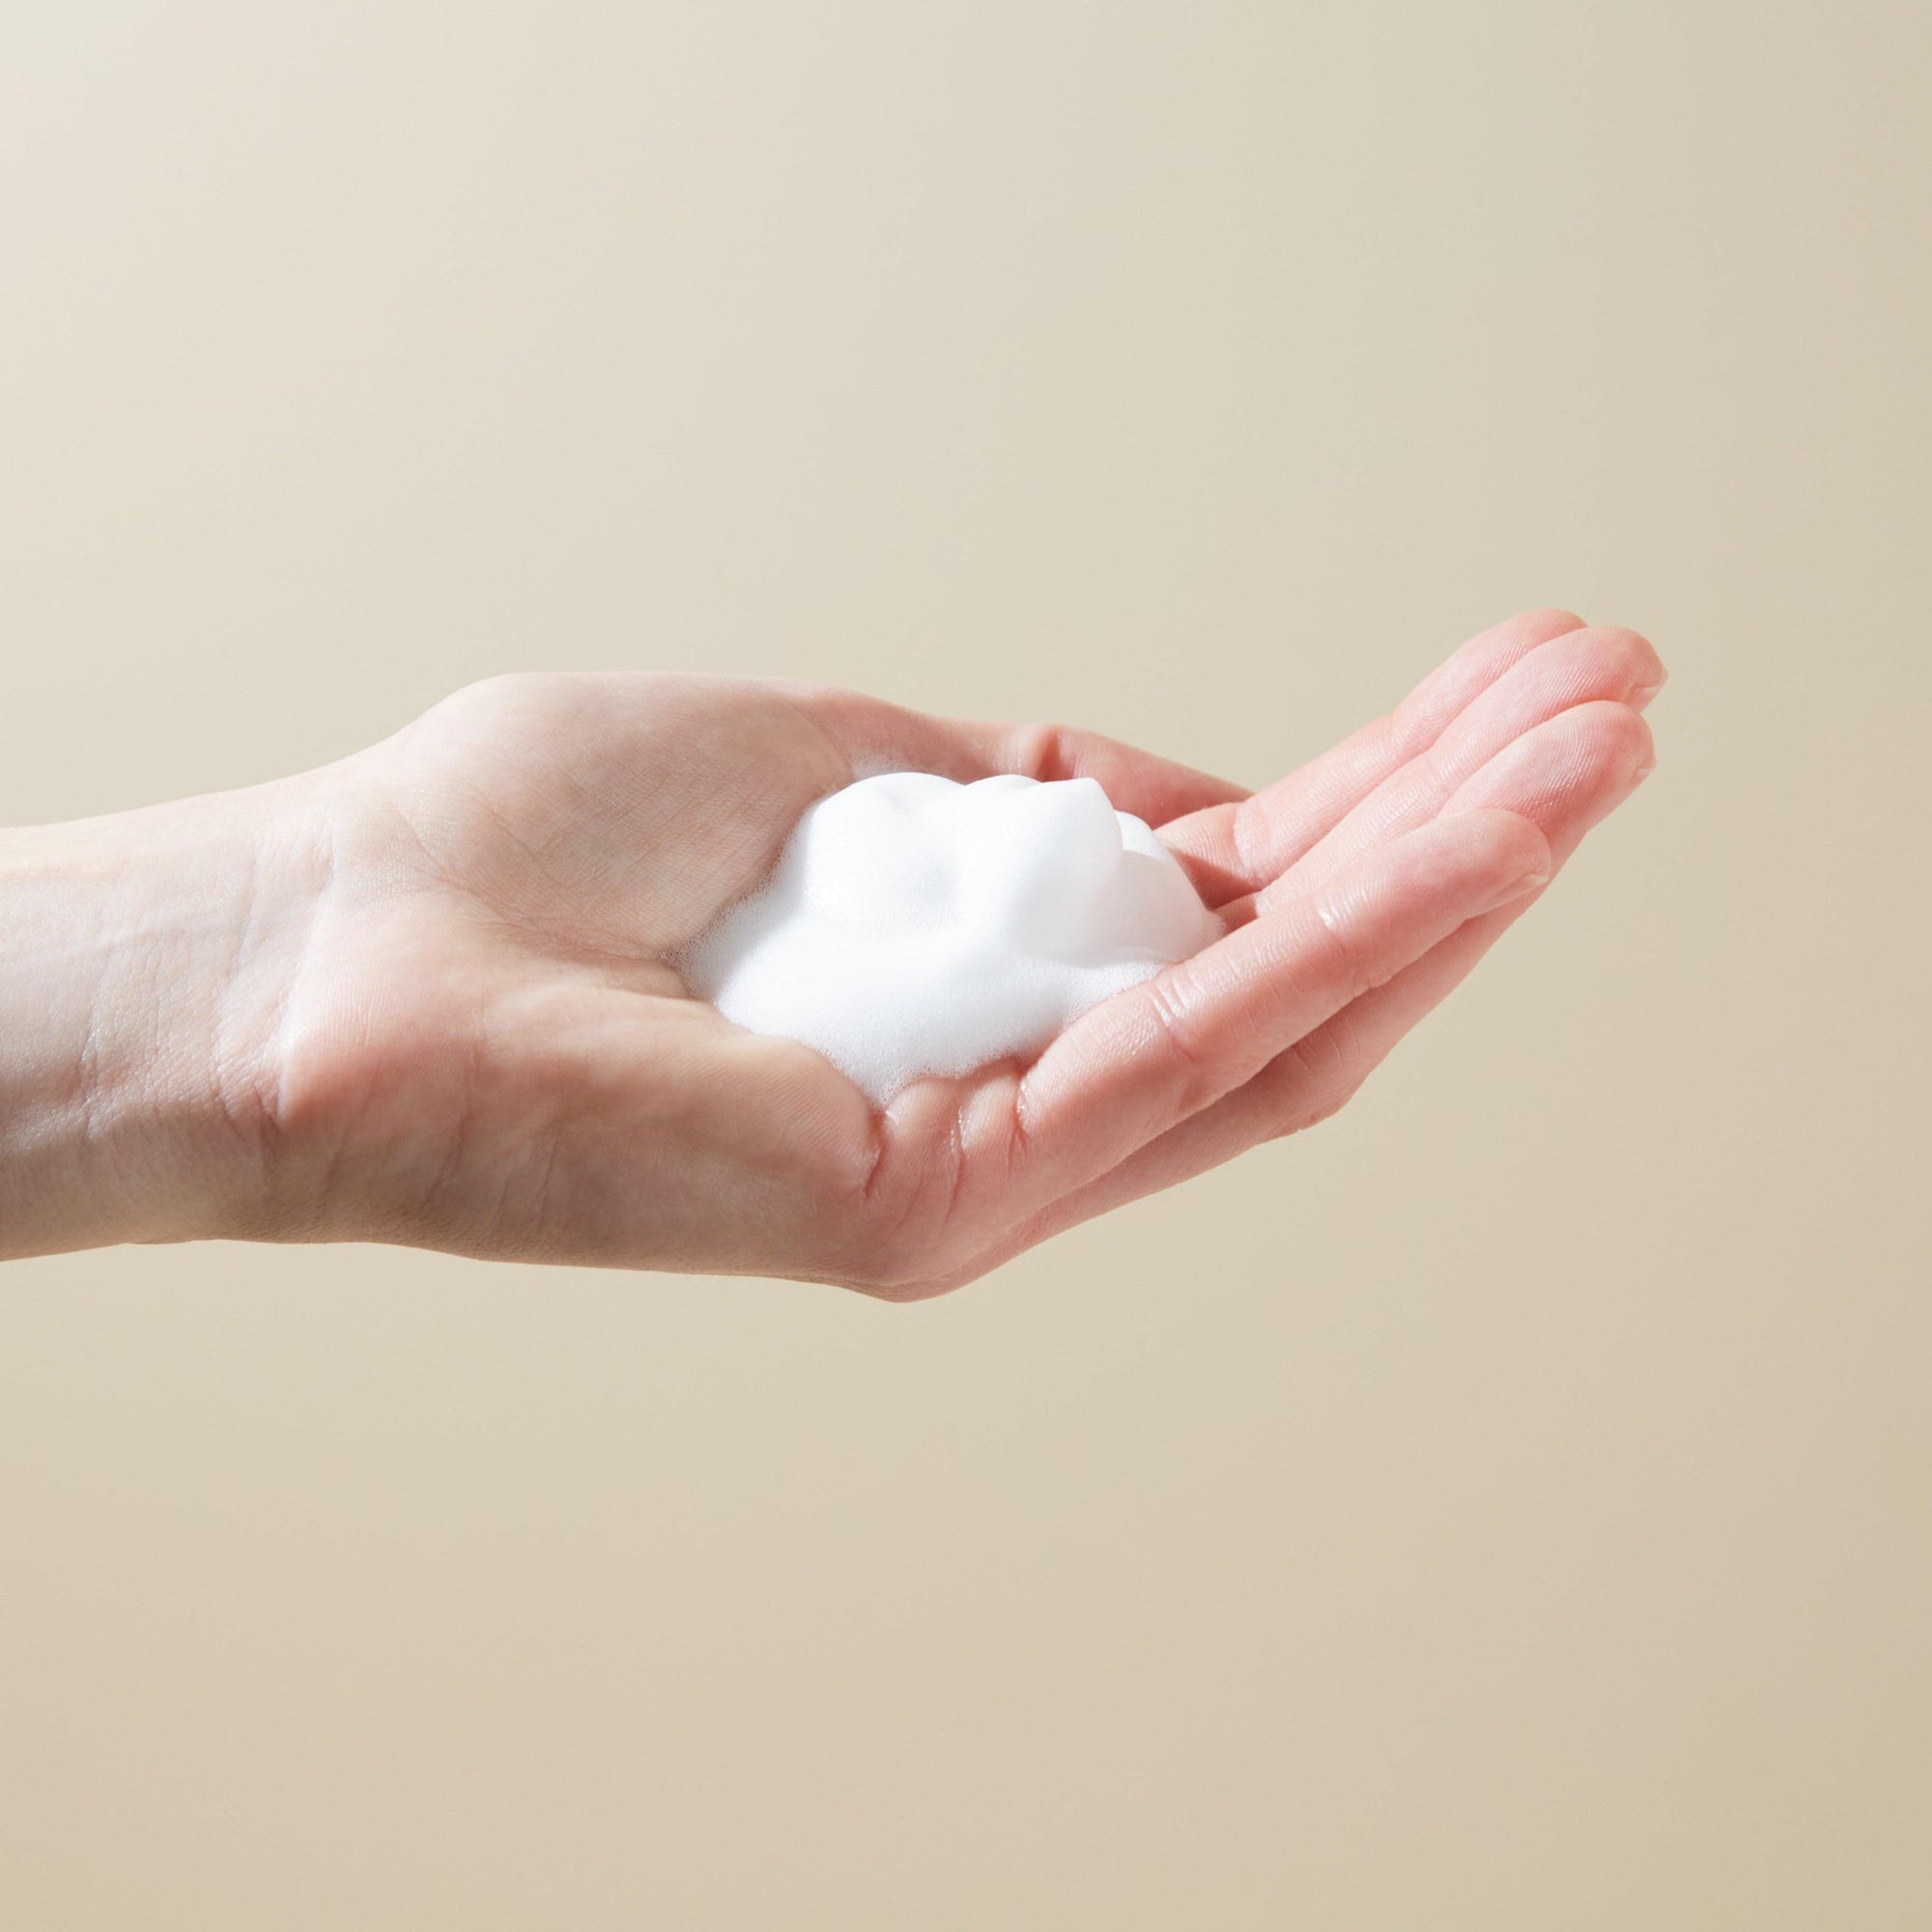 A postpartum woman's hand holding a piece of white Perineal Foam soap from Bare Mum on a beige background.